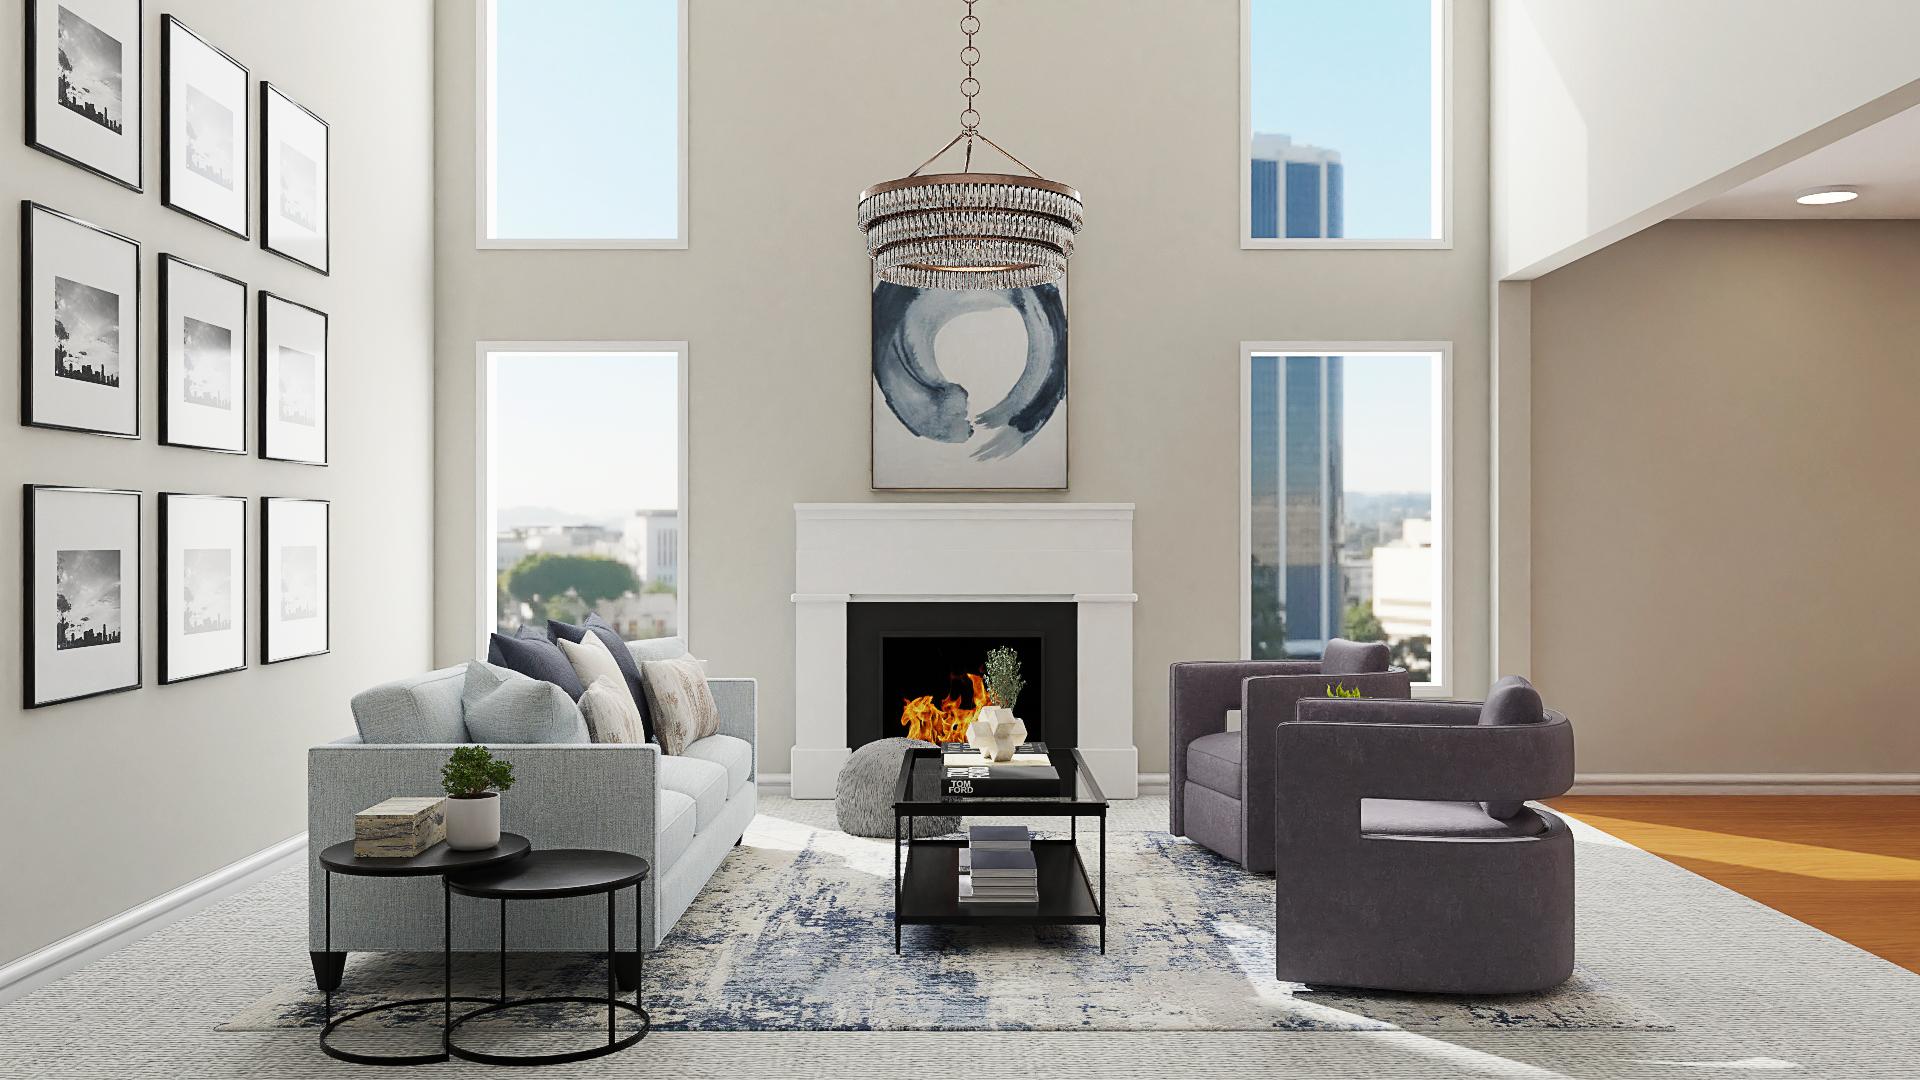 Statement Chandelier: Contemporary Living Room